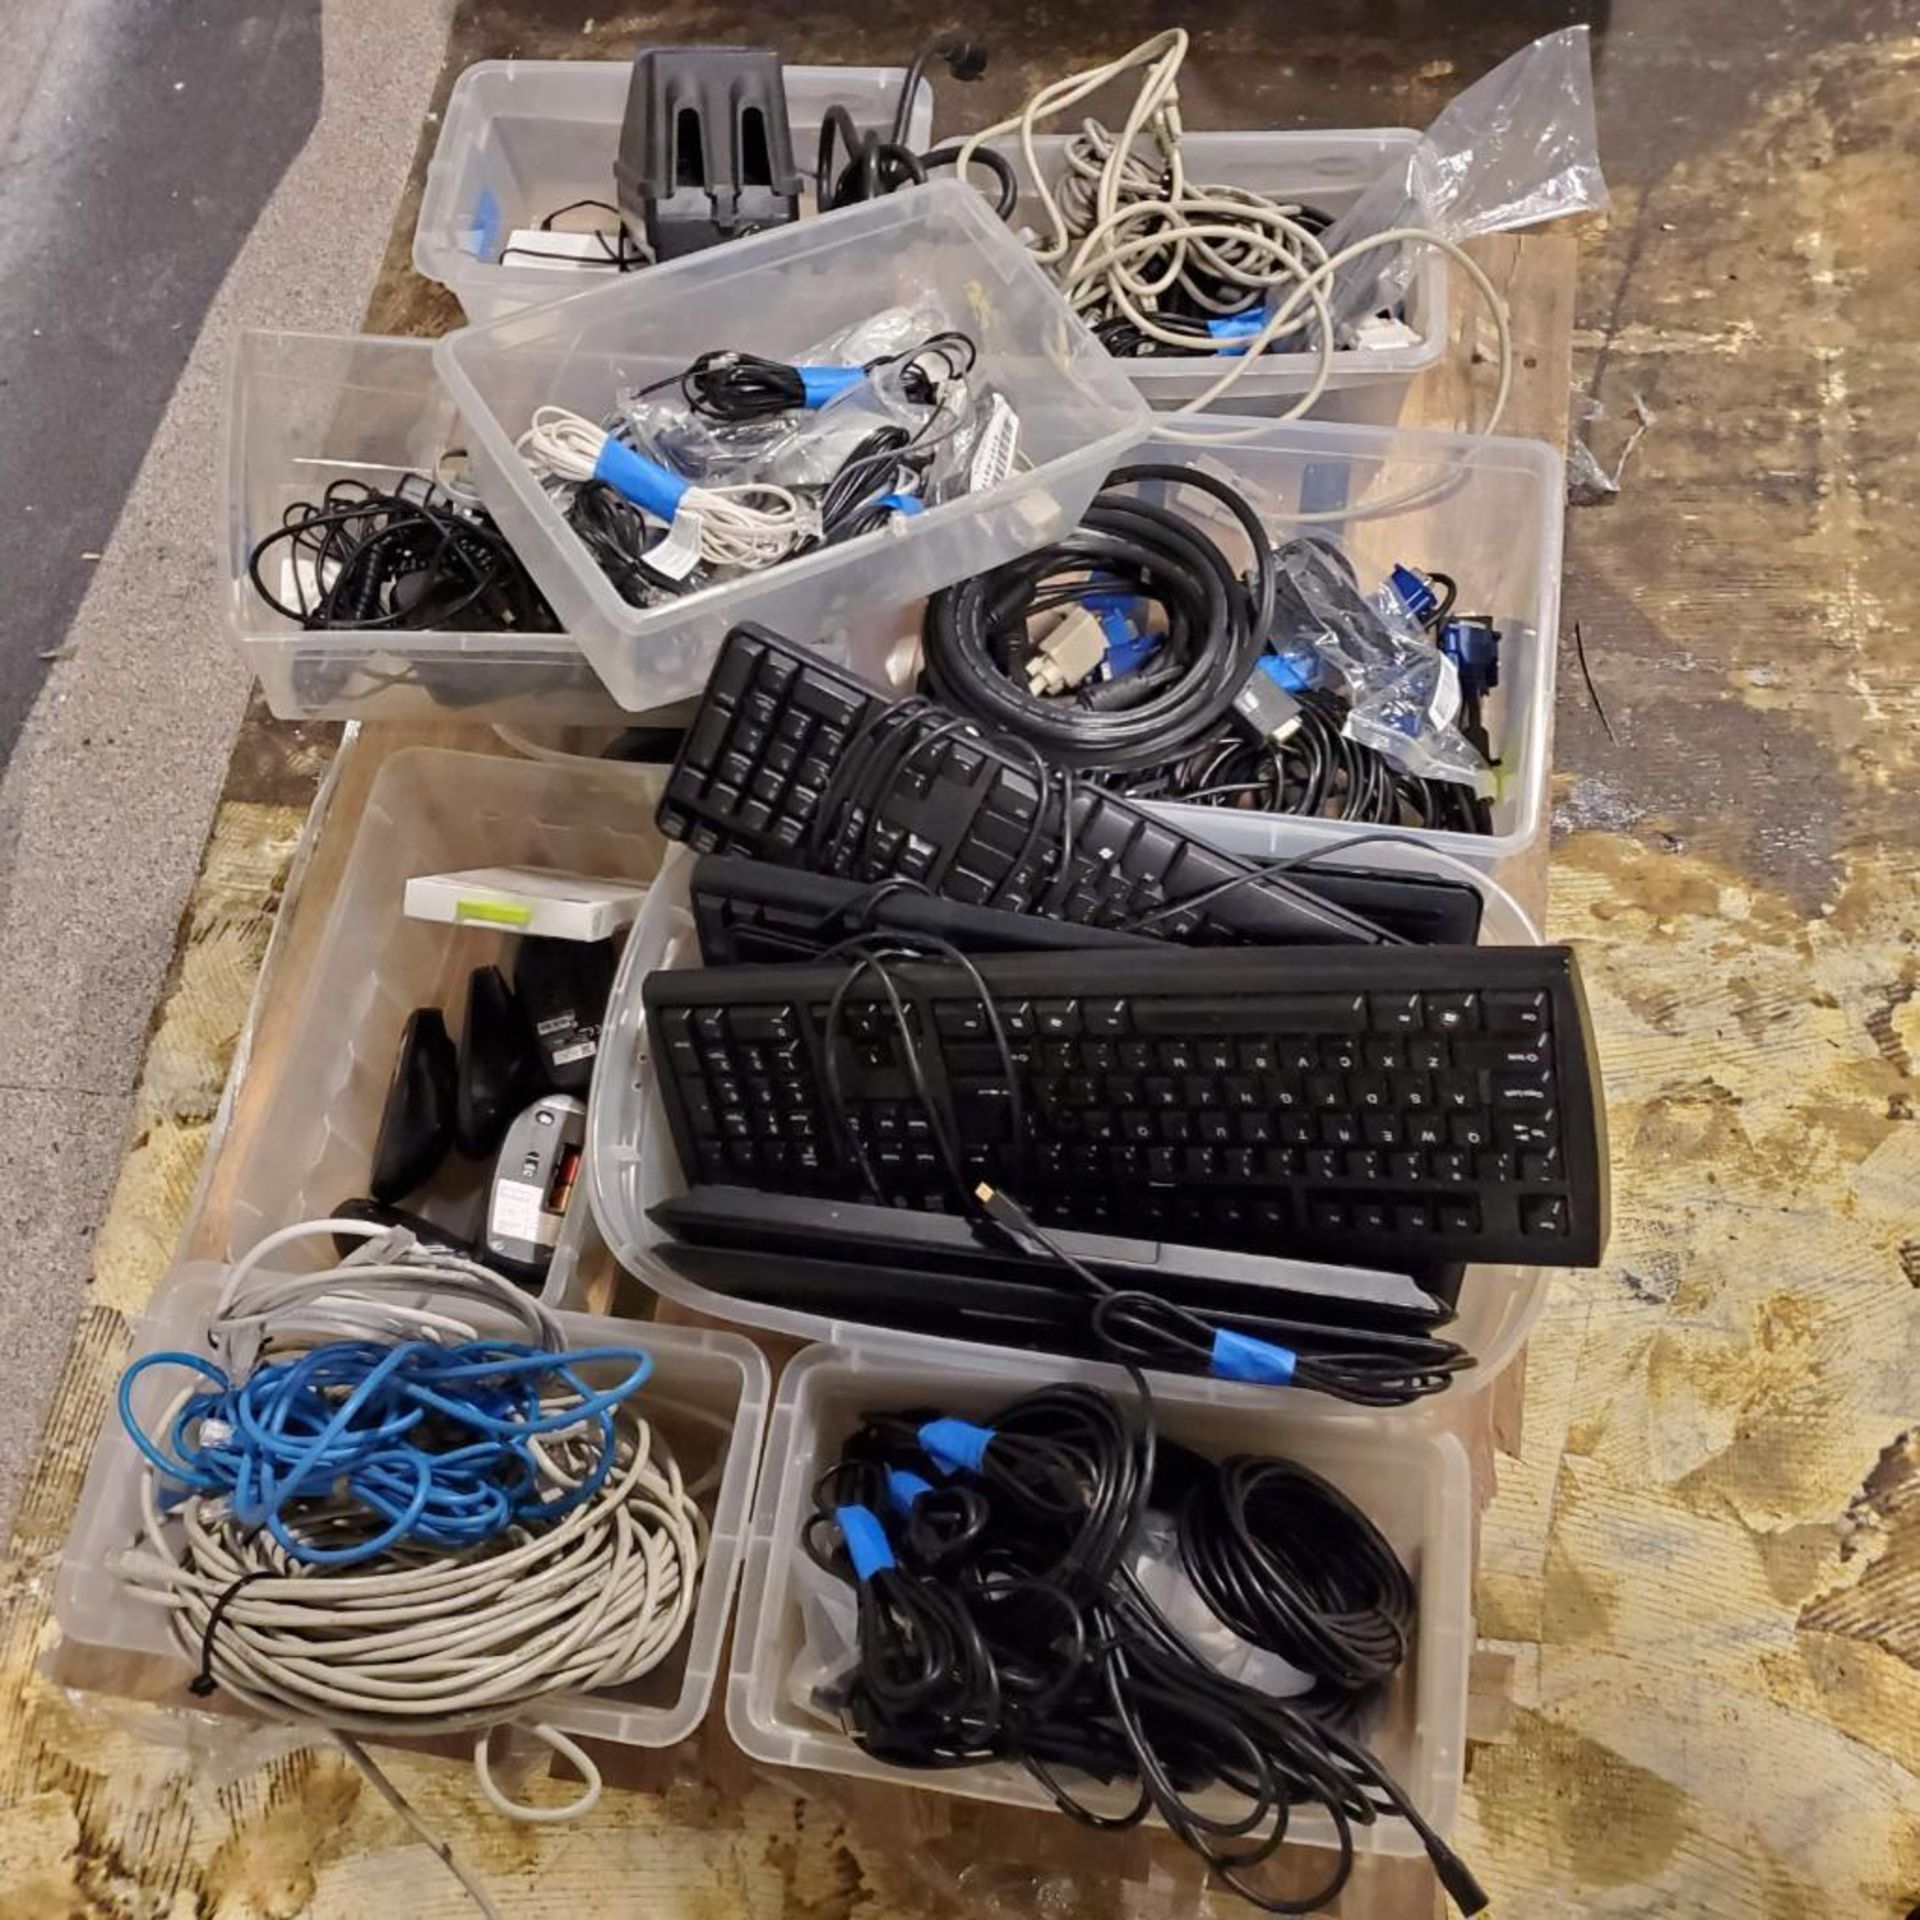 Miscellaneous Cables, Keyboards. Used, shows commercial use. See pictures. - Image 3 of 3